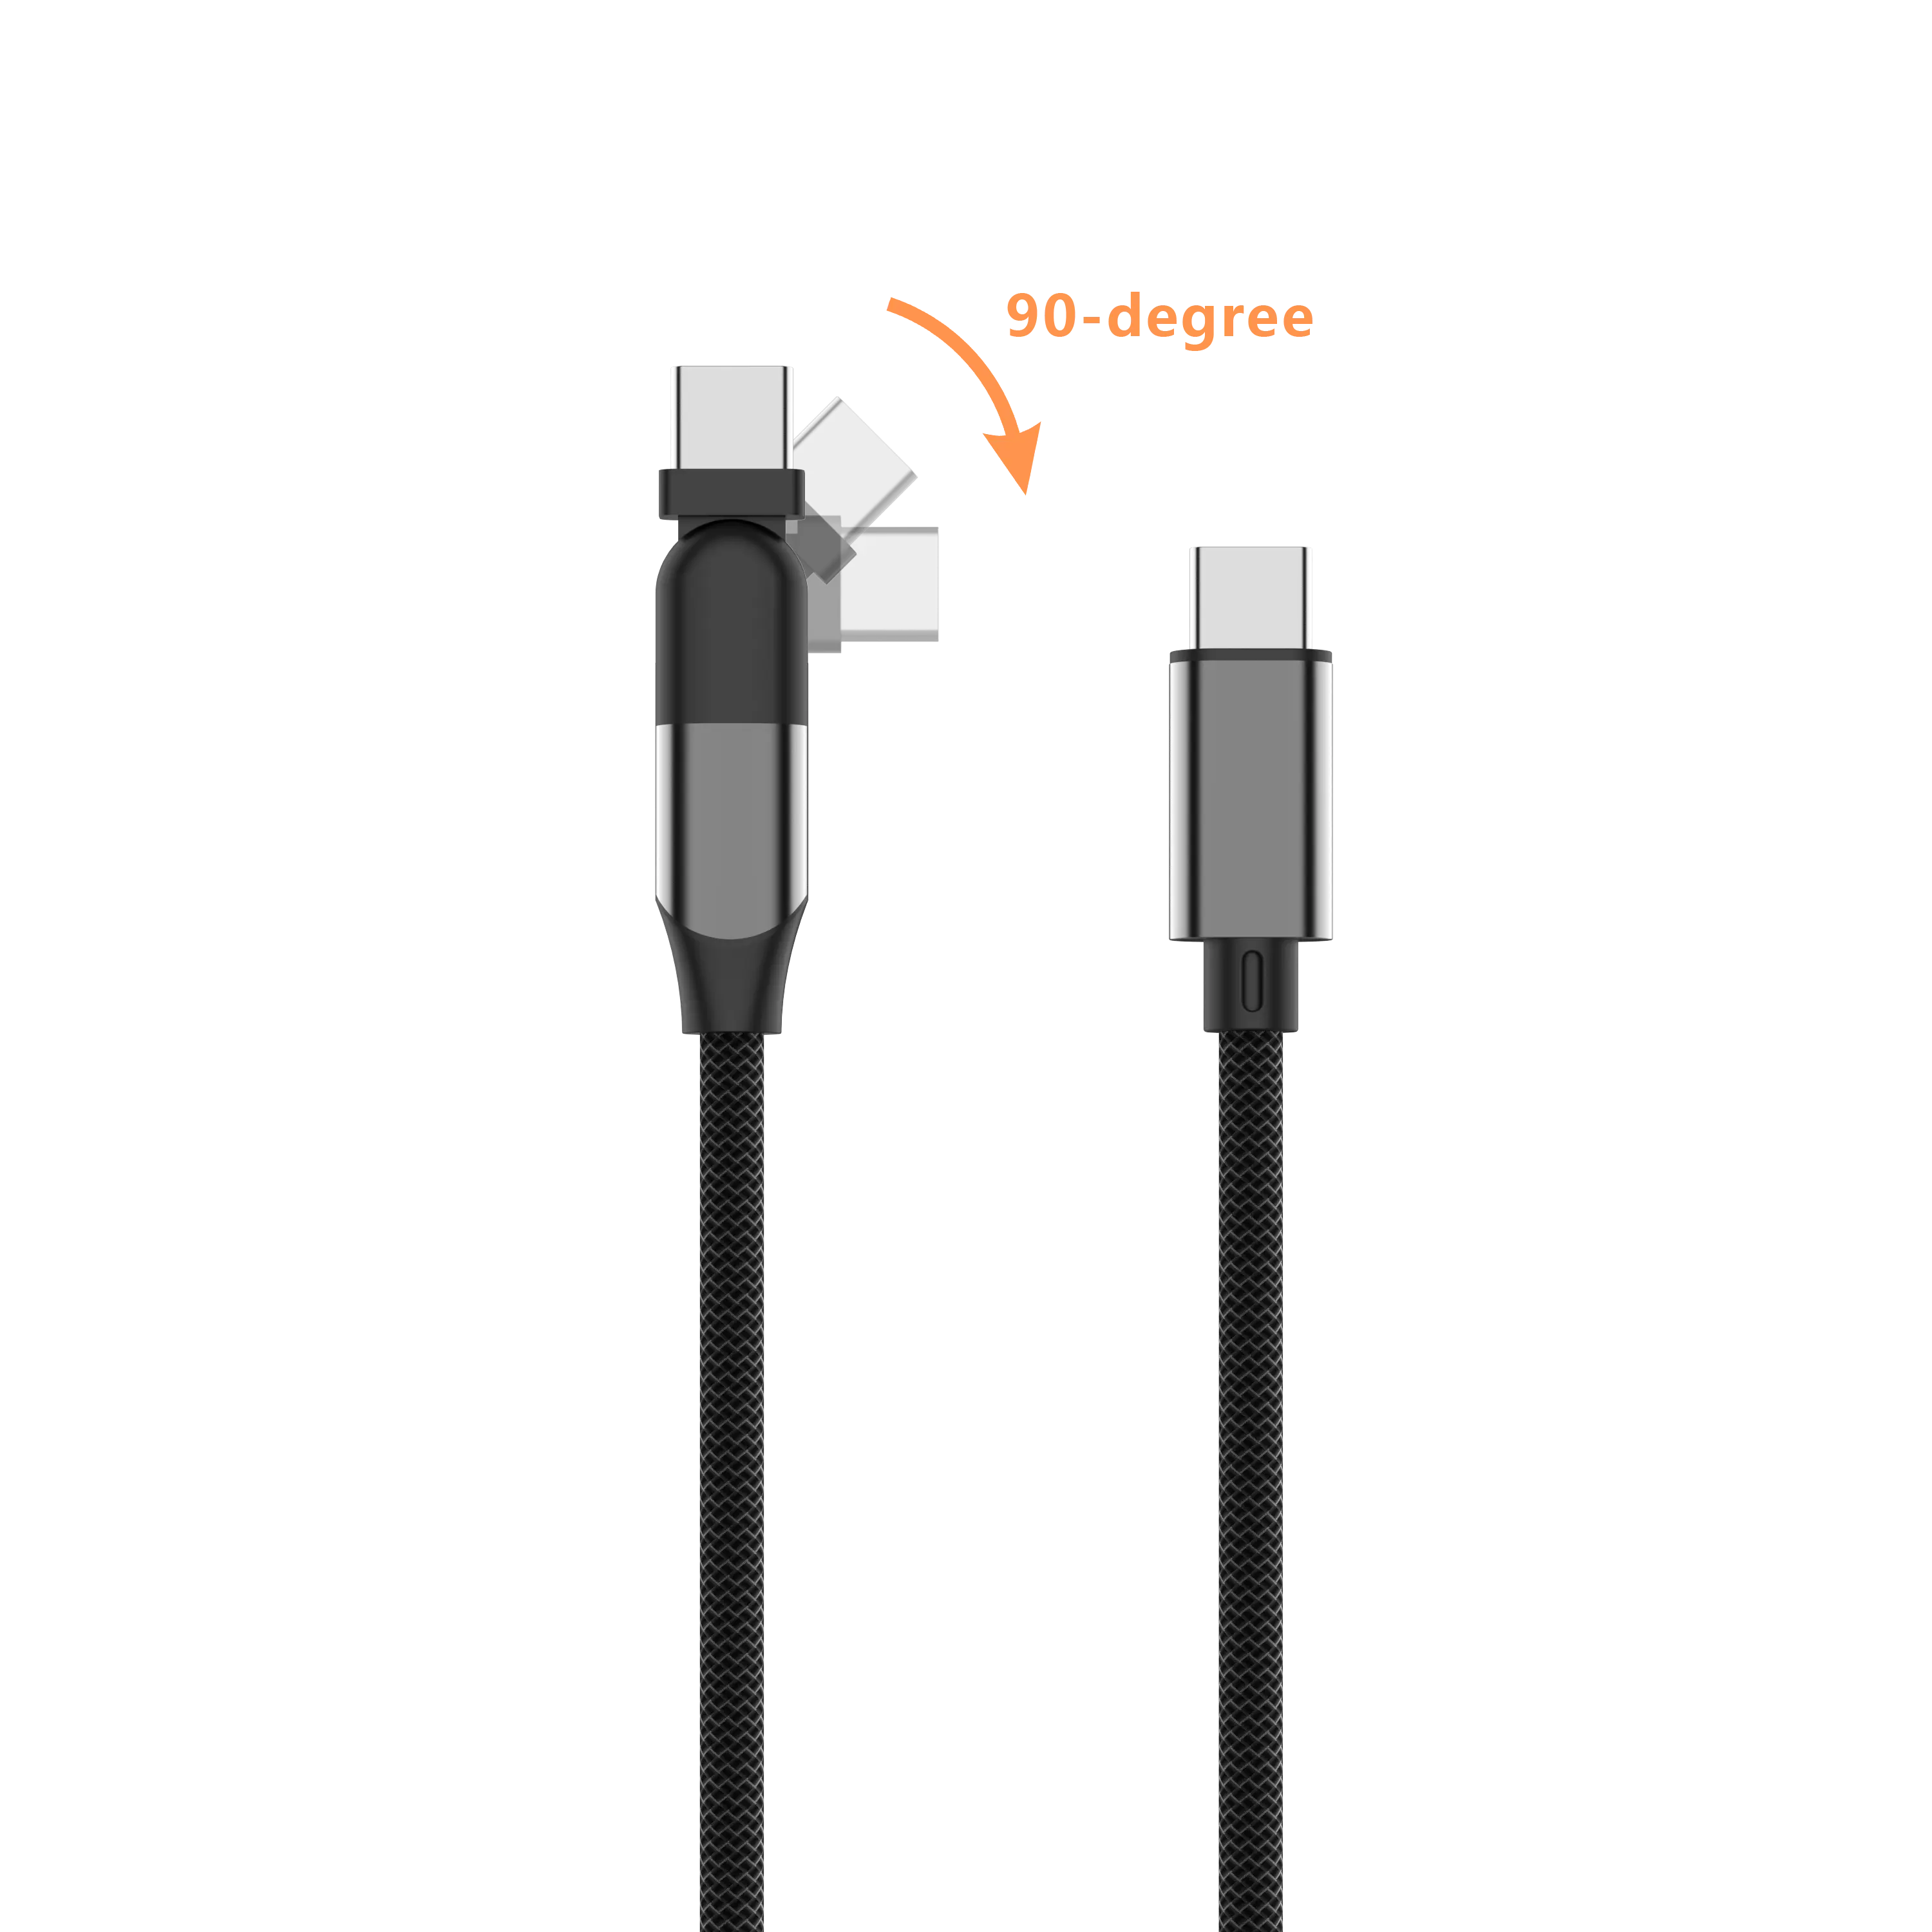 Yellowknife 90-degree 100W USB2.0 C to C cable support charging&data transfer for huawei samsung